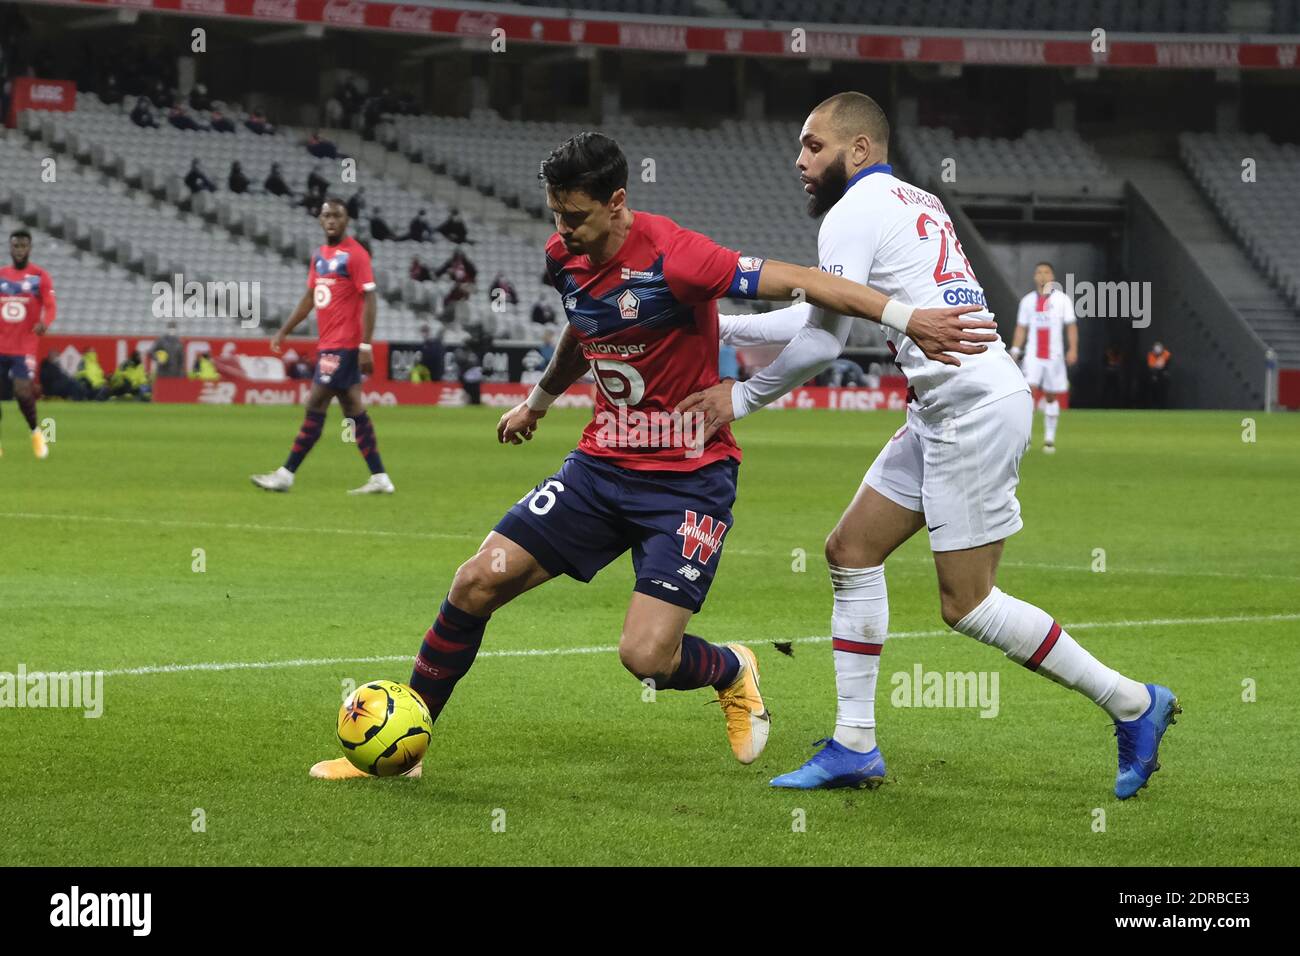 Villeneuve D'Ascq, France. 20th Dec, 2020. Lille Defender JOSE MIGUEL DA ROCHA FONTE in action during the French championship soccer, Ligue 1 Uber Eats, between Lille and Paris Saint Germain at Pierre Mauroy Stadium - Villeneuve d'Ascq.Second wave in France of COVID-19 : the French government has decided on total containment and a curfew at 8 p.m. as well as all sporting events will be played without spectators, until further notice Credit: Pierre Stevenin/ZUMA Wire/Alamy Live News Stock Photo